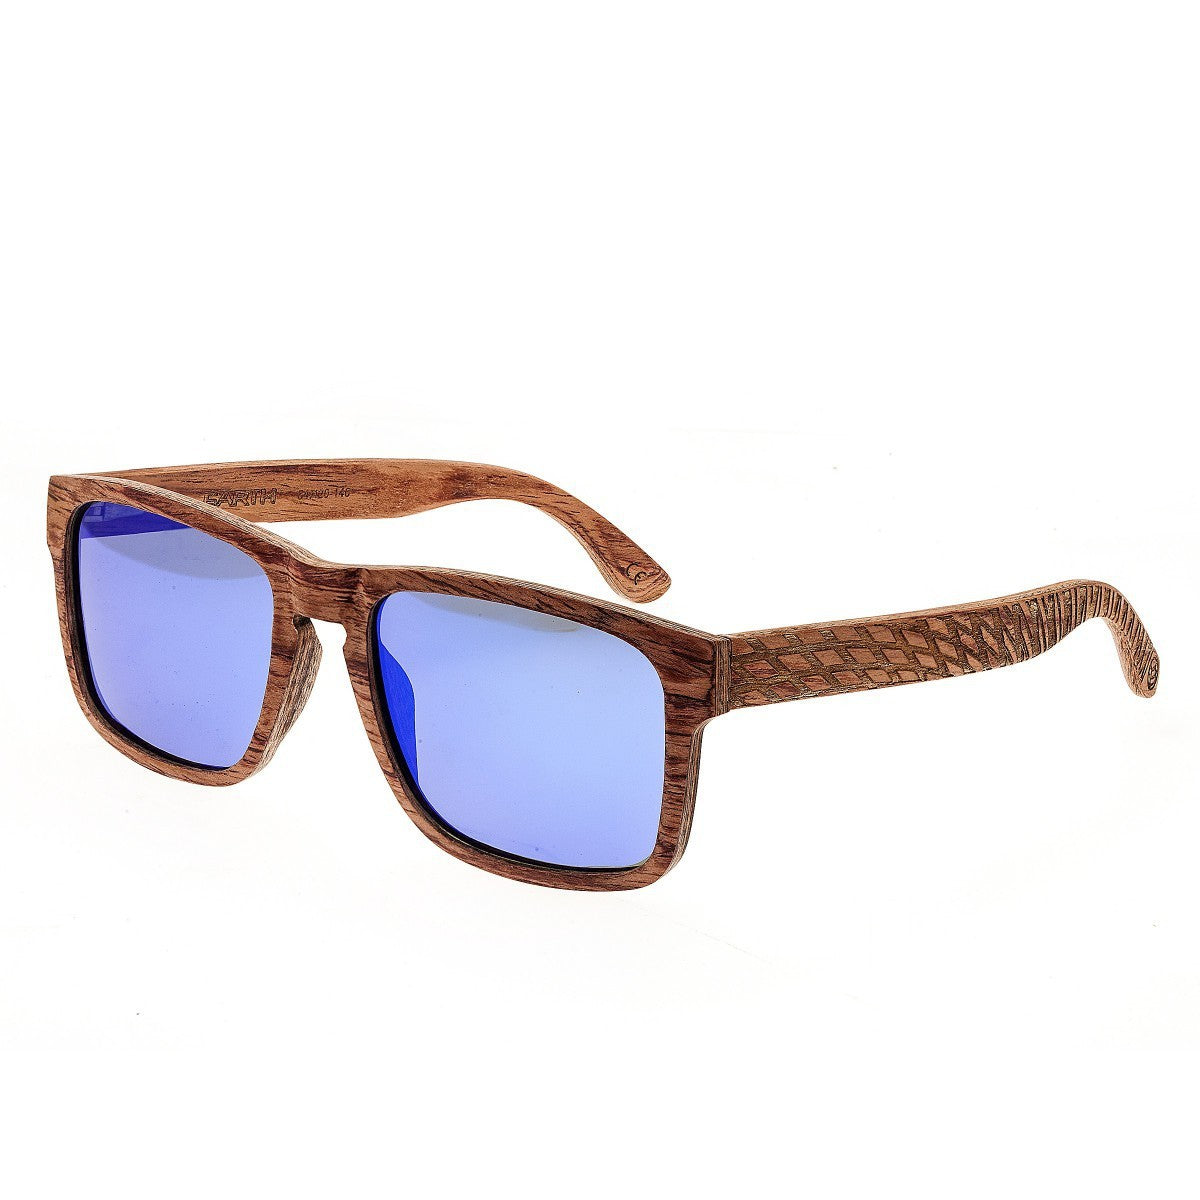 Earth Wood Whitehaven Polarized Sunglasses - Red-Rosewood/Purple - ESG080R